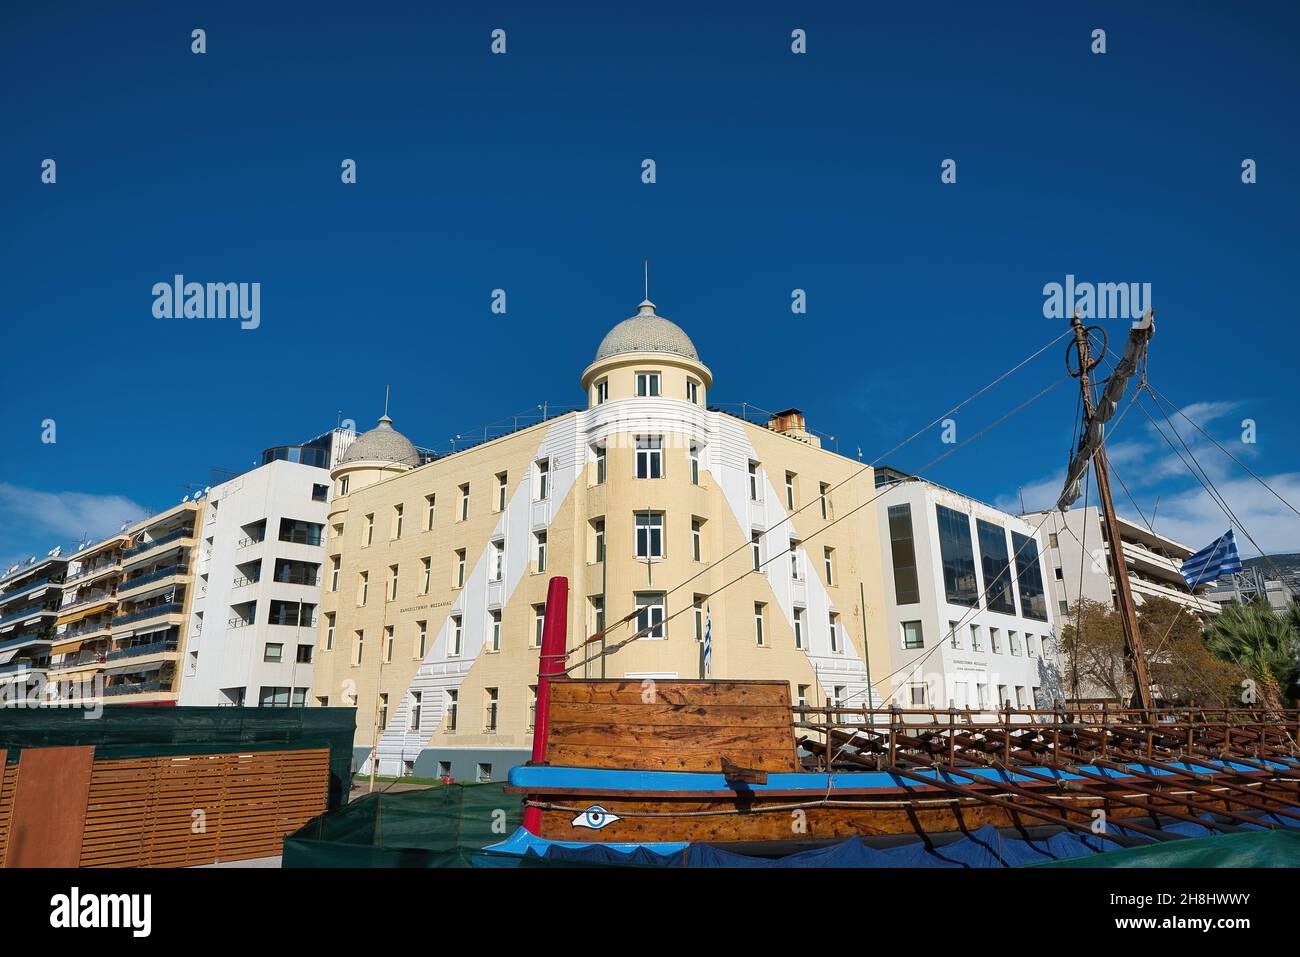 the University building and the mythical ship Argo in the port of Volos, Greece Stock Photo